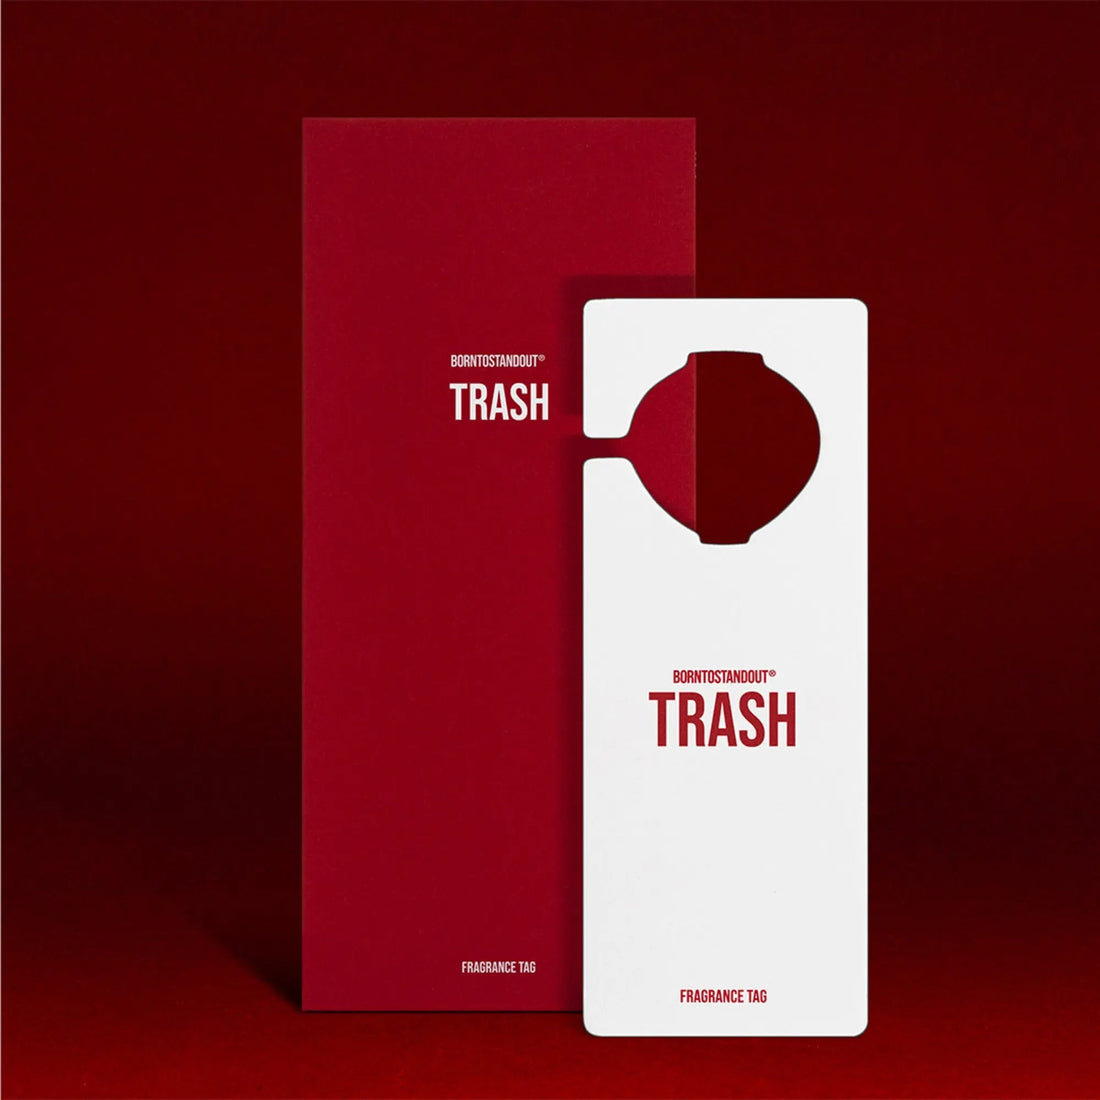 Born to stand out Trash Fragrance Tag